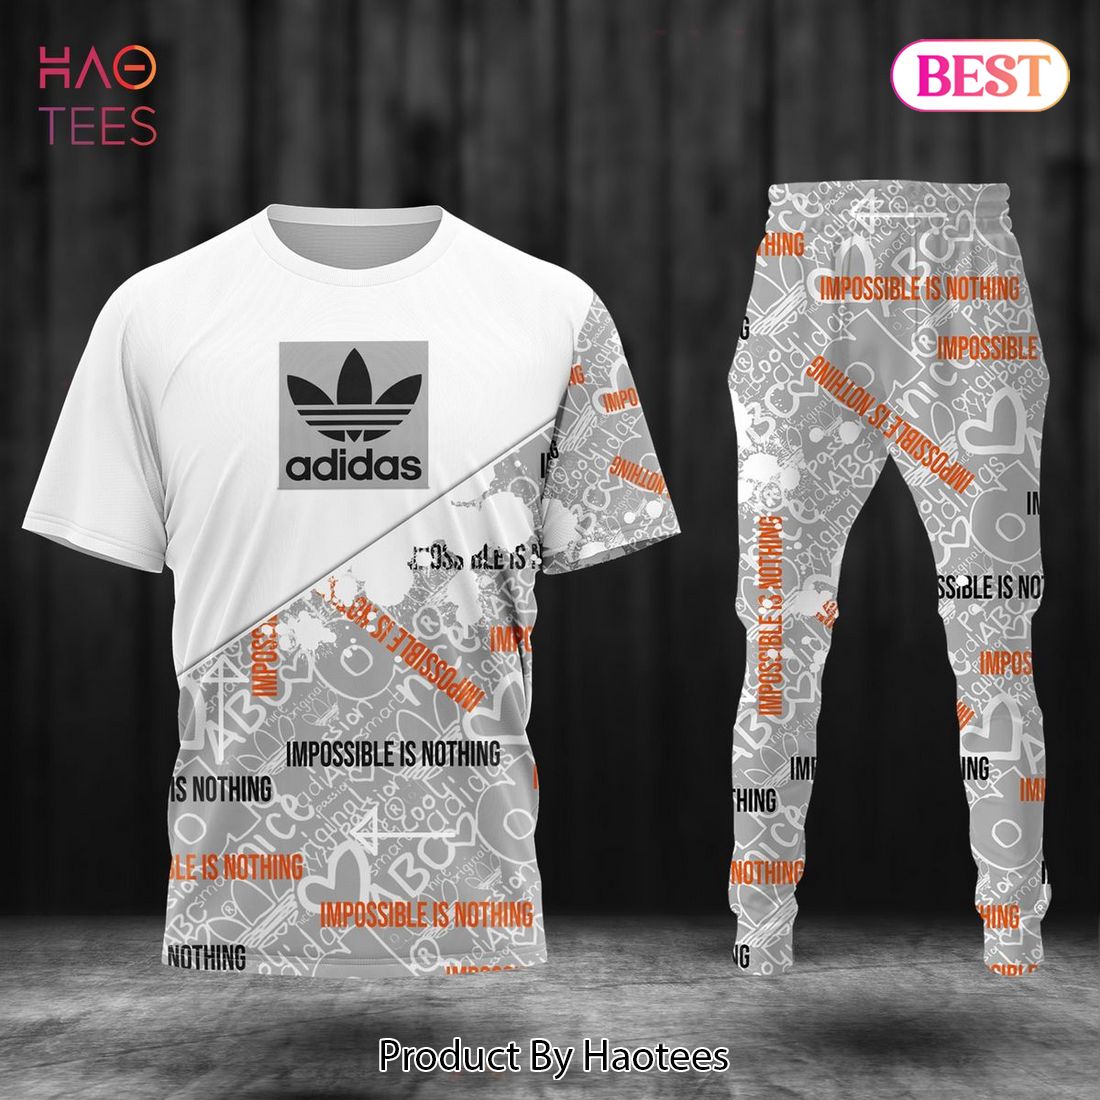 HOT Adidas Impossible Is Nothing Luxury Brand T-Shirt And Pants POD Design